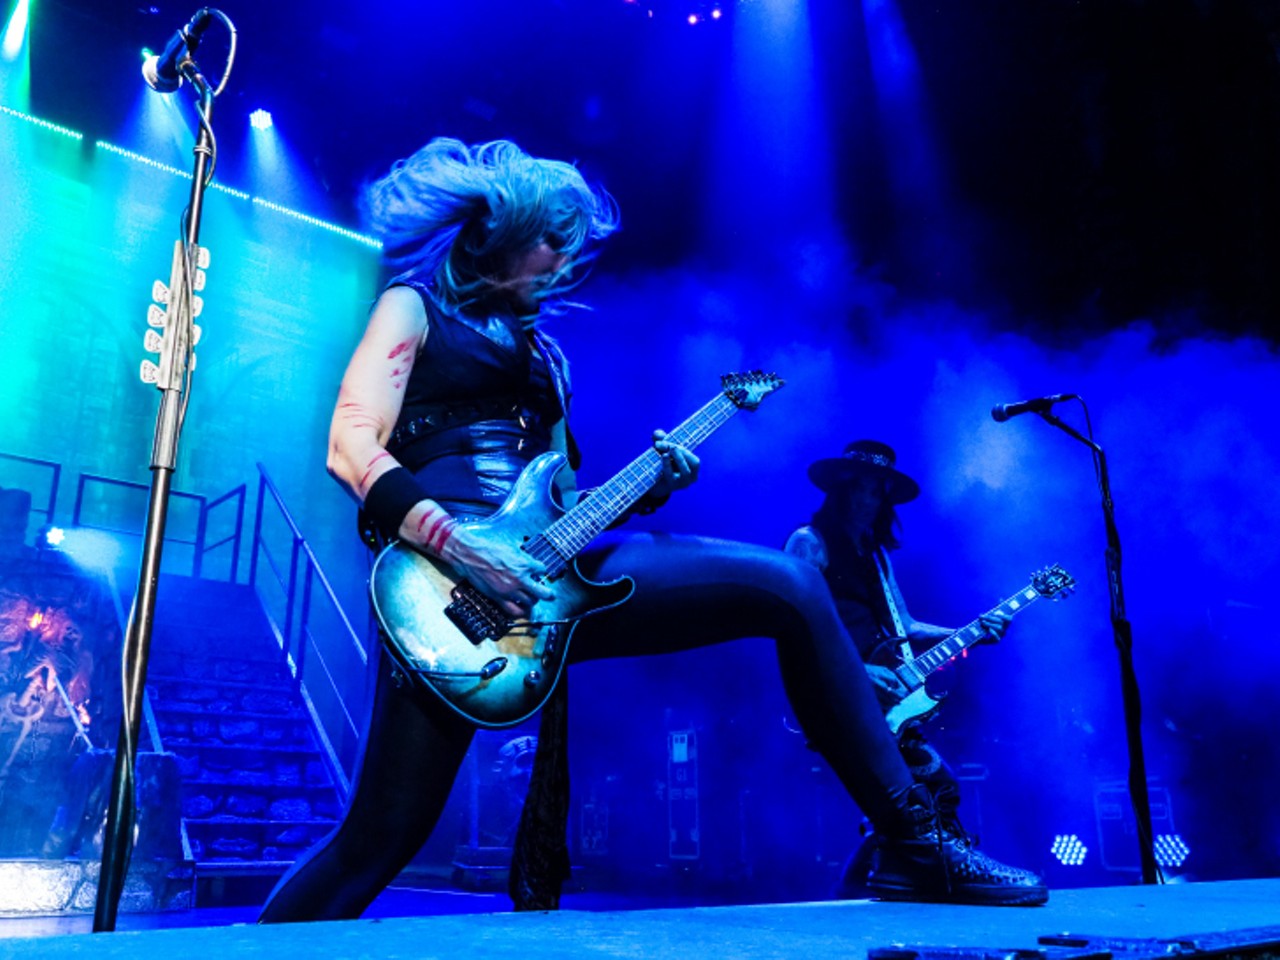 All the mayhem we saw at Alice Cooper and Halestorm at DTE Energy Music Theatre